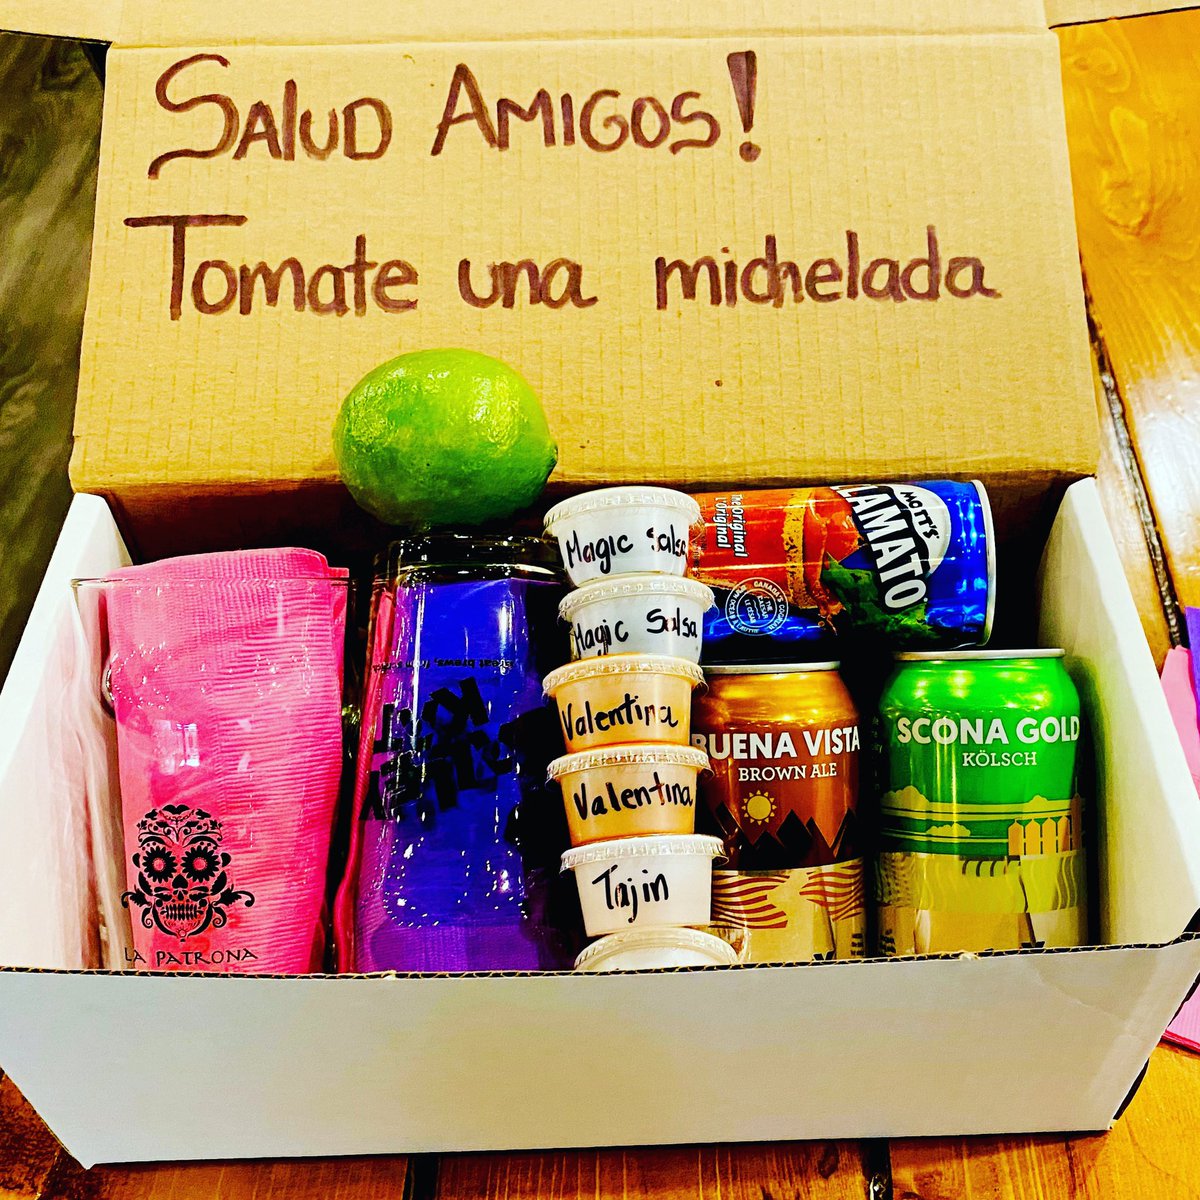 It’s your dreams coming true! A La Patrona make it at home Michelada kit! In collaboration with #alleykatbeer, you get to pick your choice of Buena Vista Brown Ale or Scona Gold! Now brush off the patio furniture and enjoy some rays! #lapatronayeg #yegfood #shpkeats #shpkfood